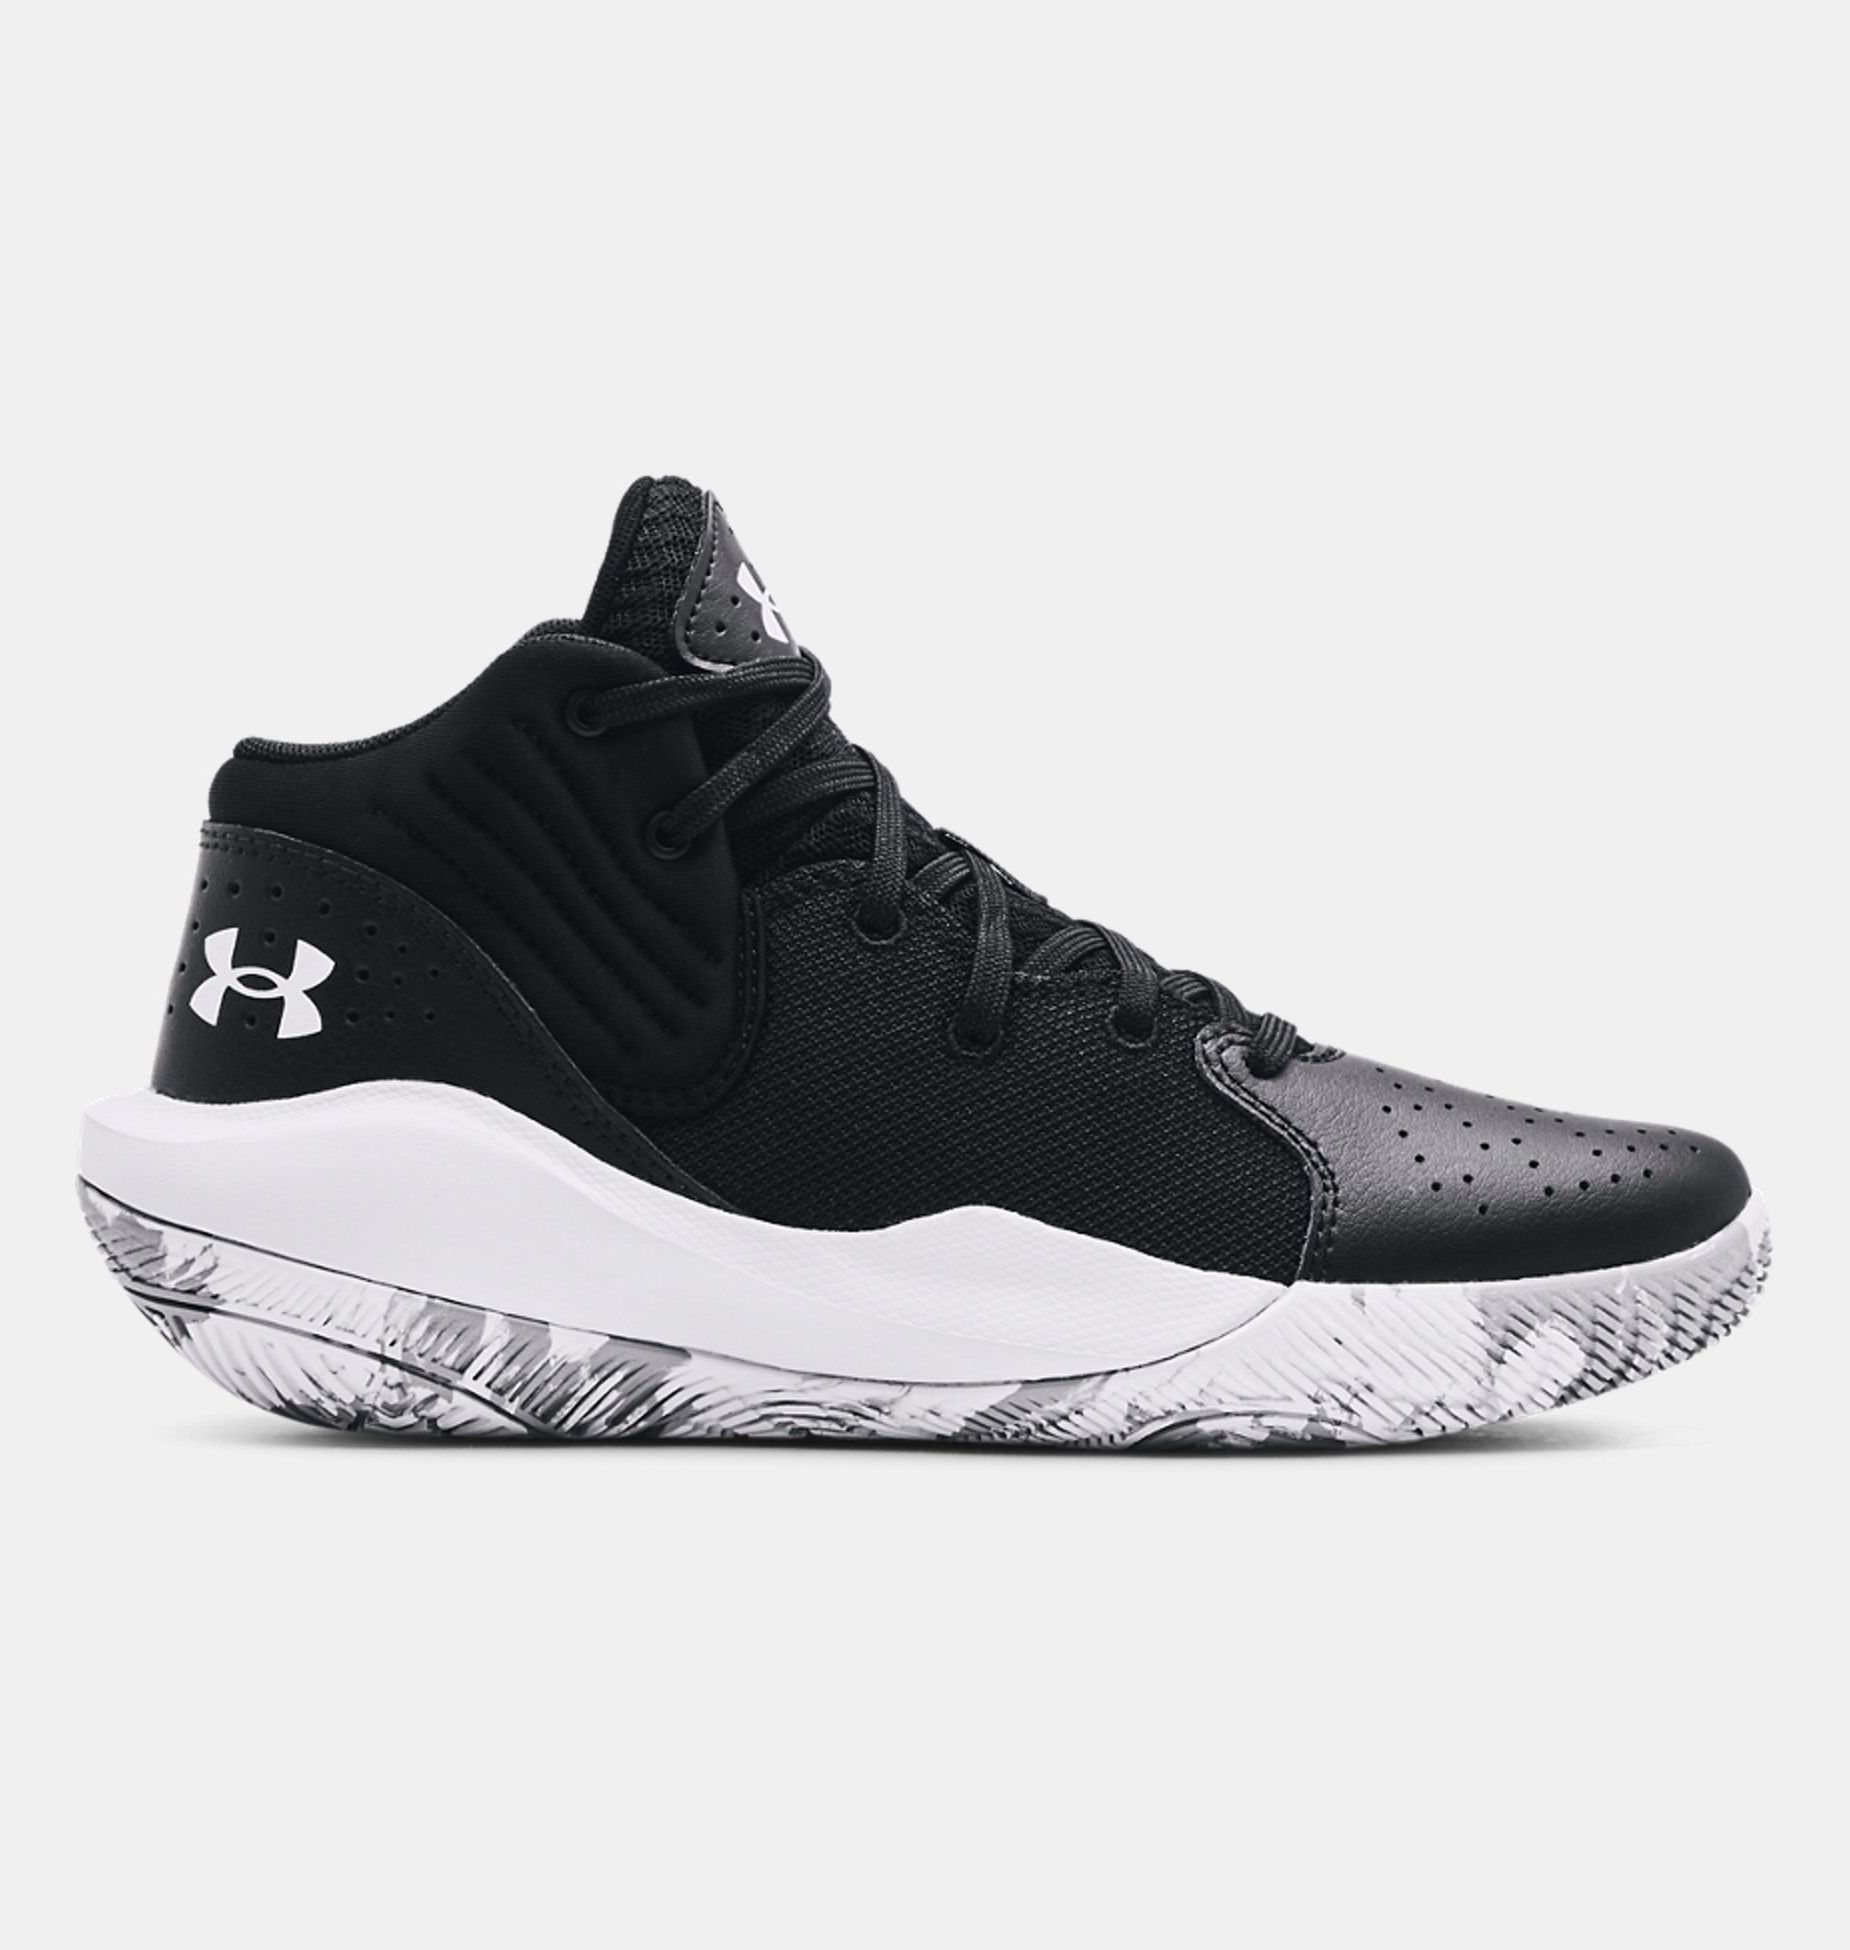 Basketball Shoes -  under armour Jet 21 Basketball Shoes